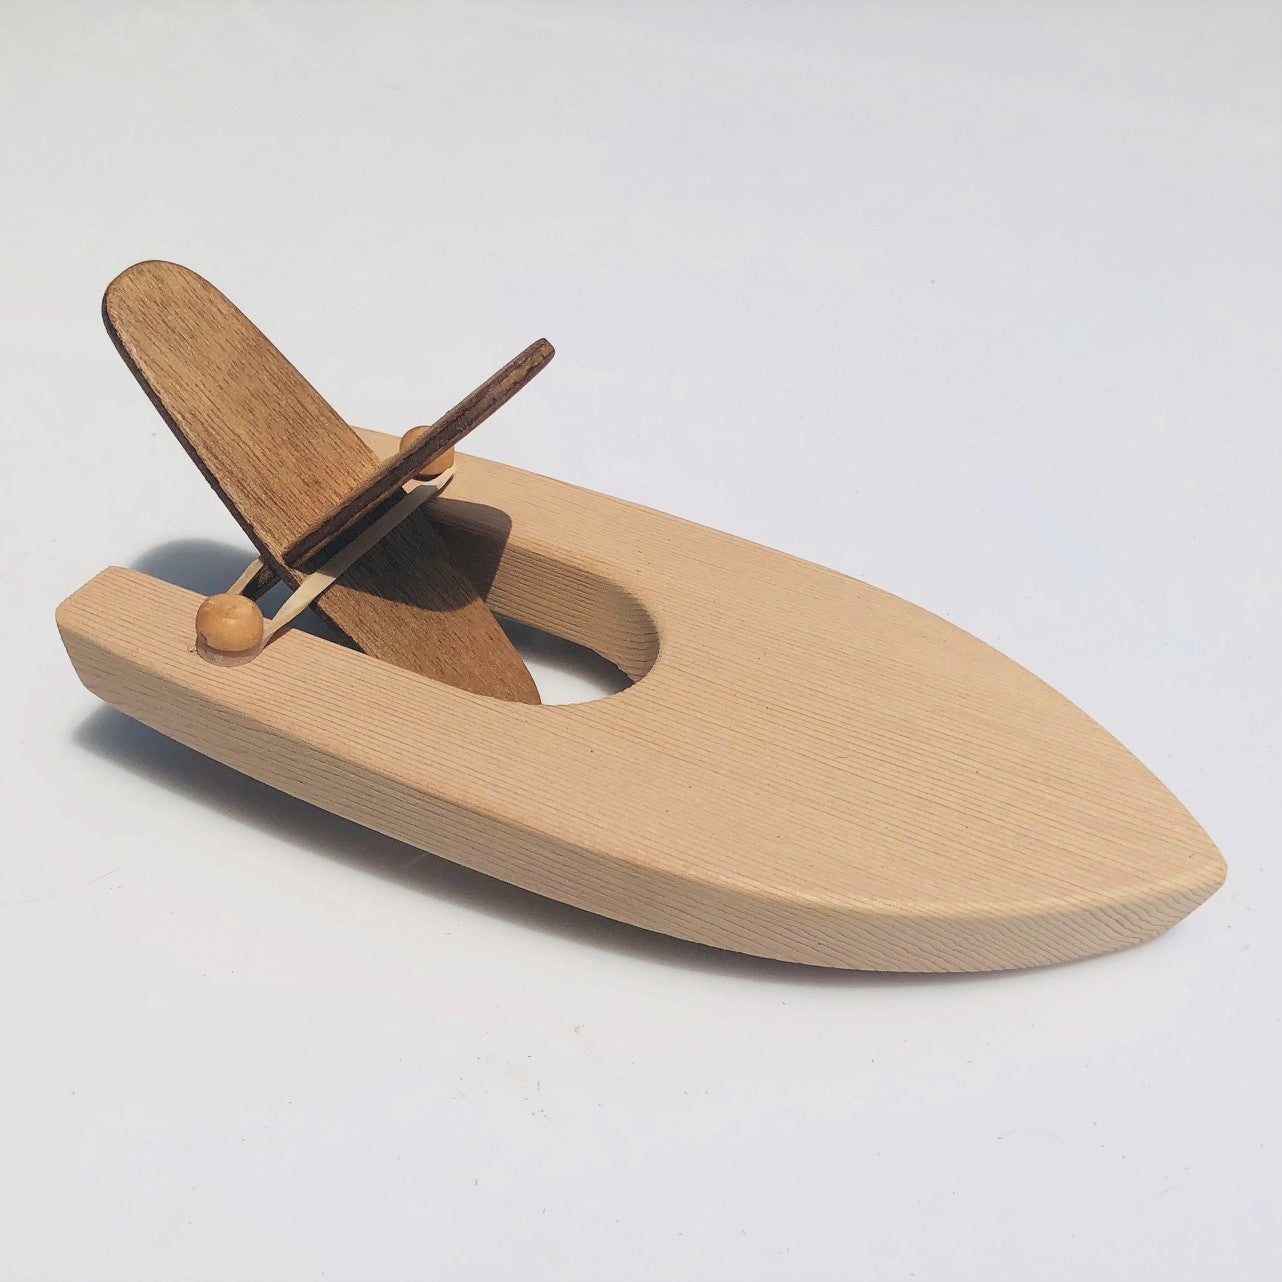 Self-Propelling Boat - Large with 2 people